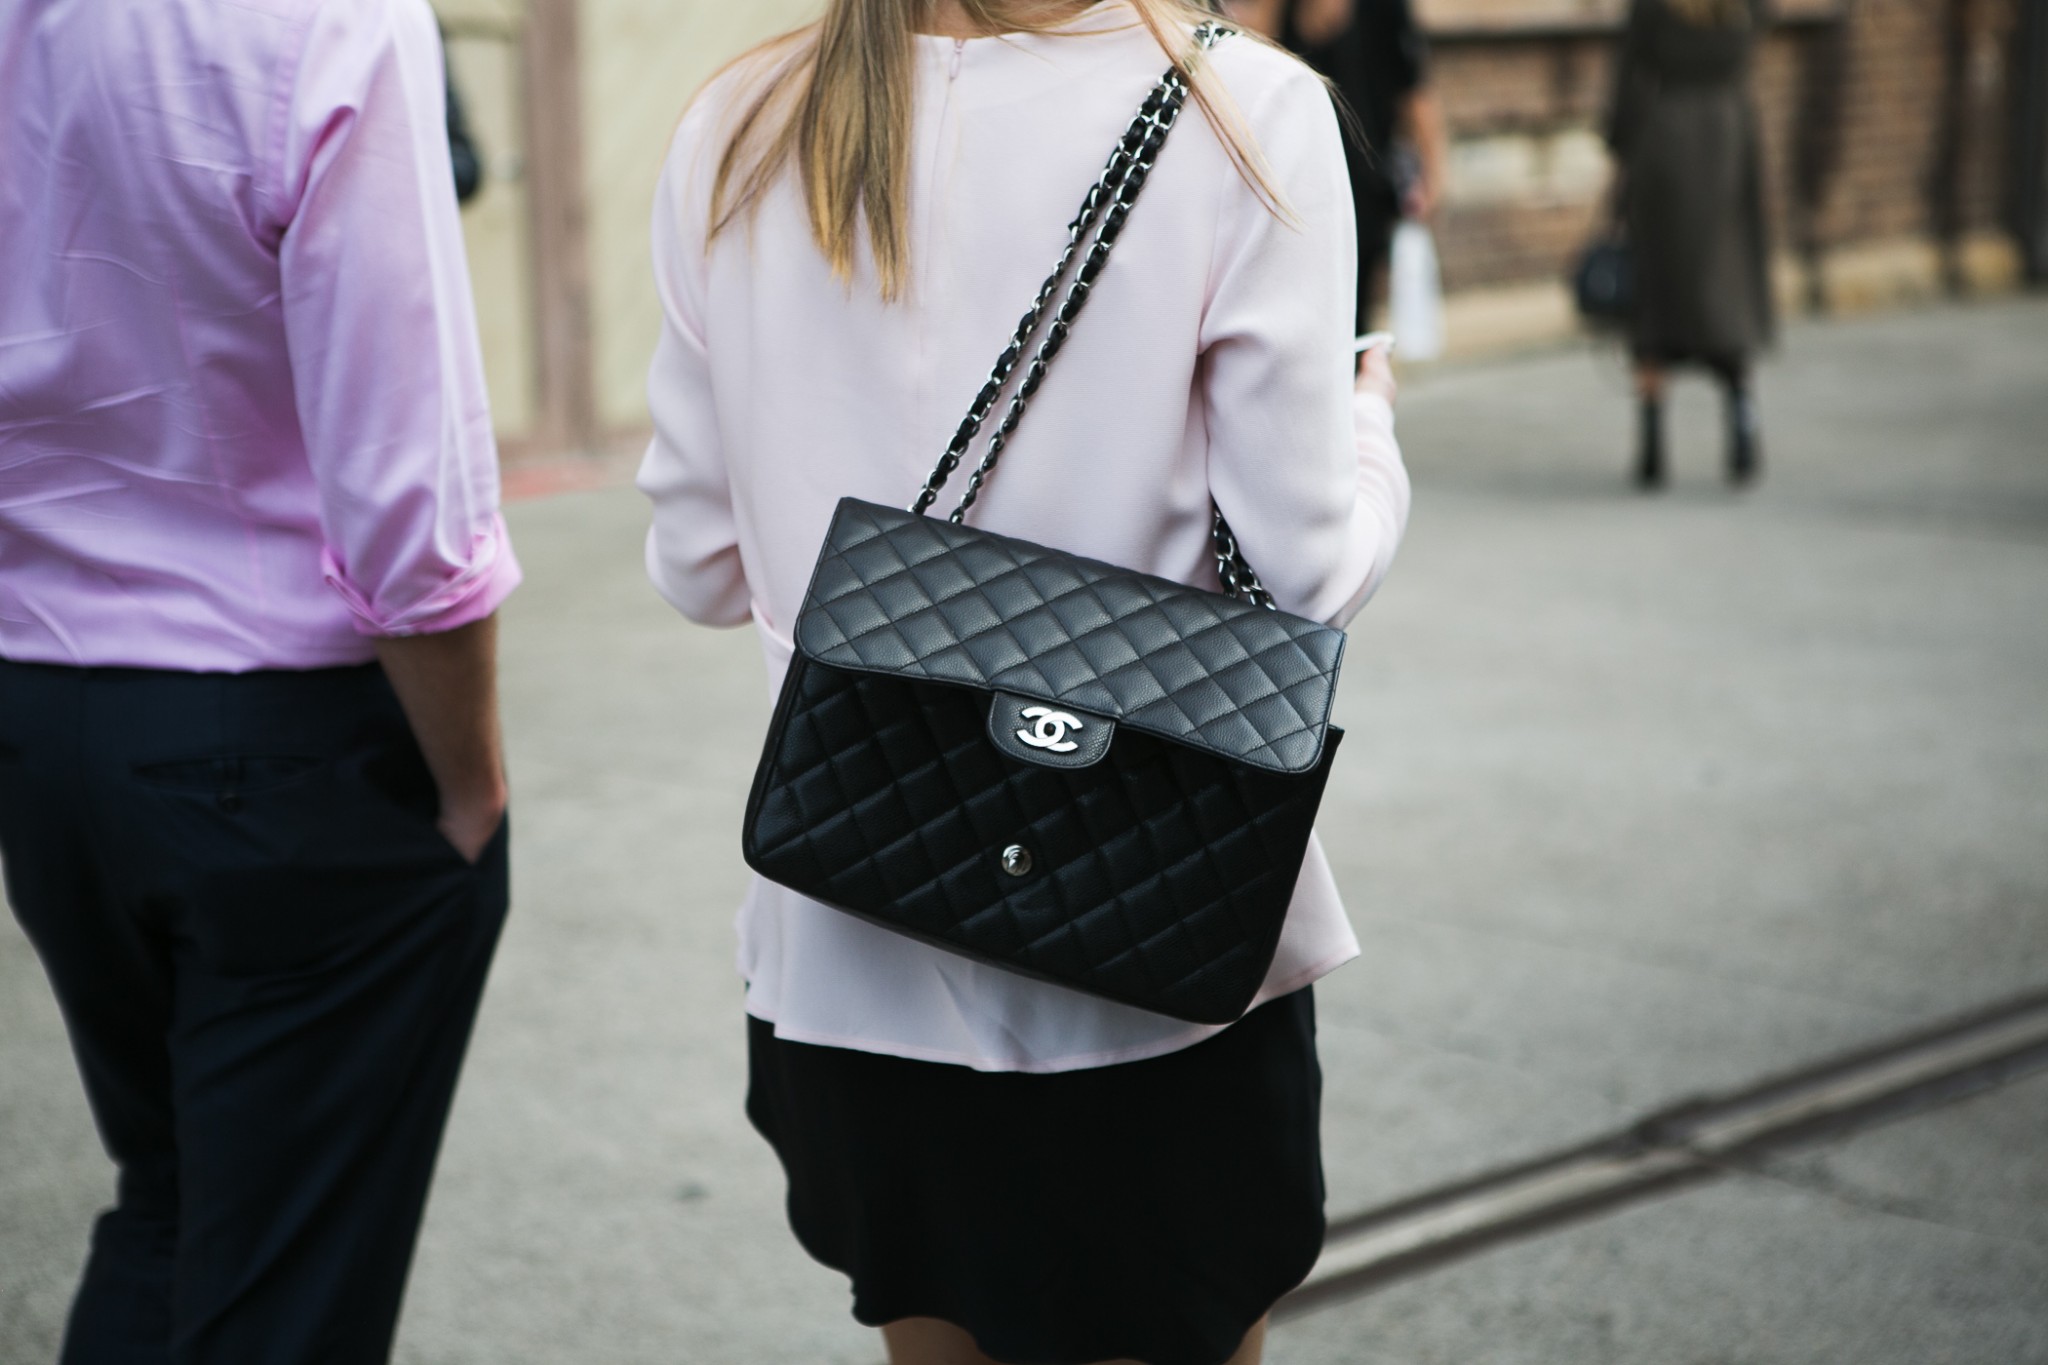 Designer items that always feel unreal to me #thegate #designerbags #c